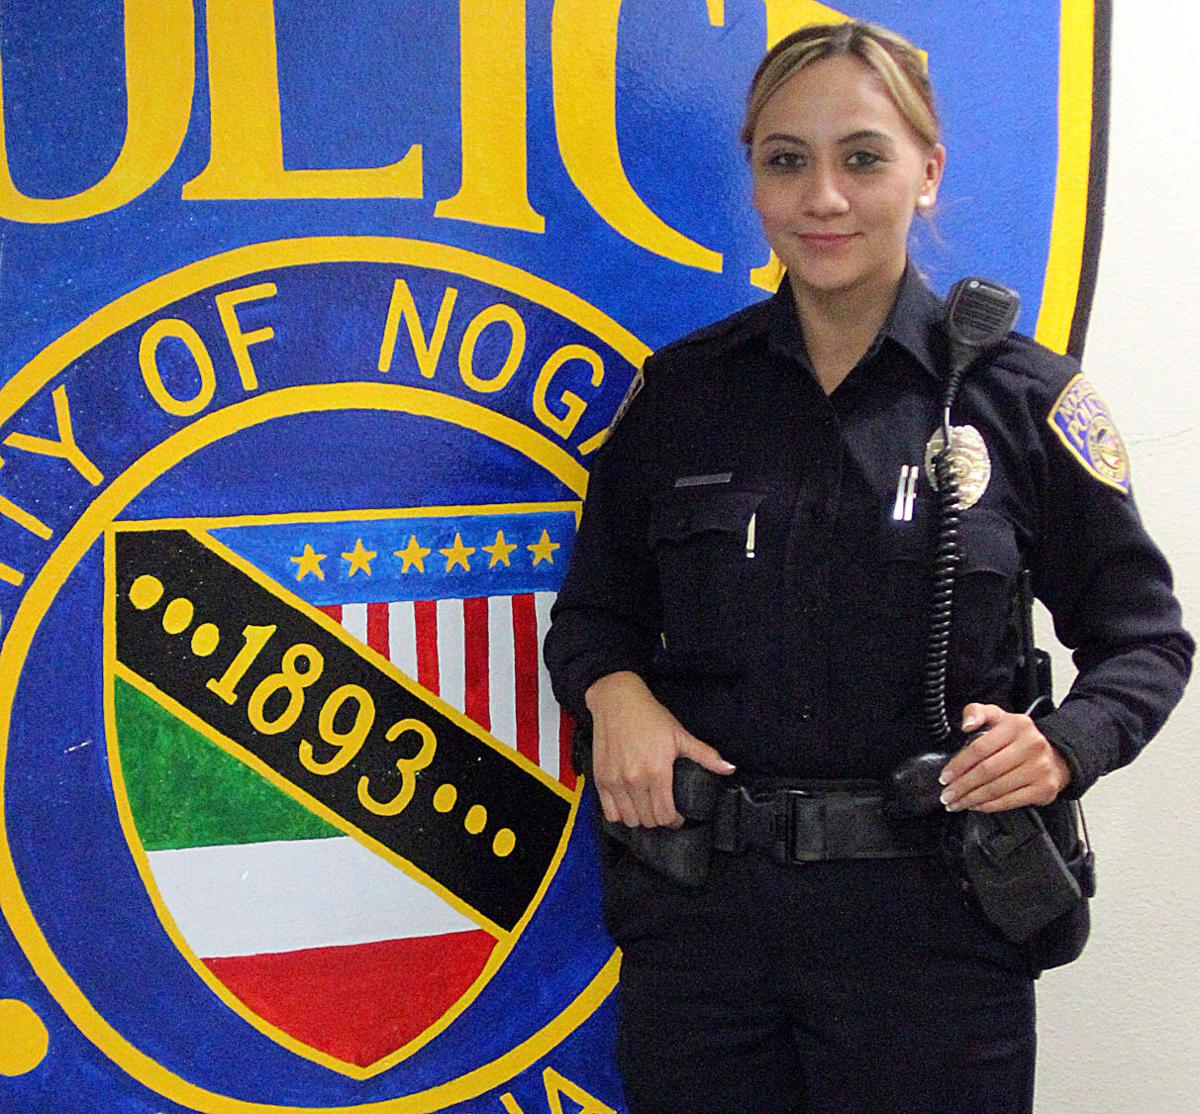 Few In Number Female Police Officers Play Big Role Local News Stories